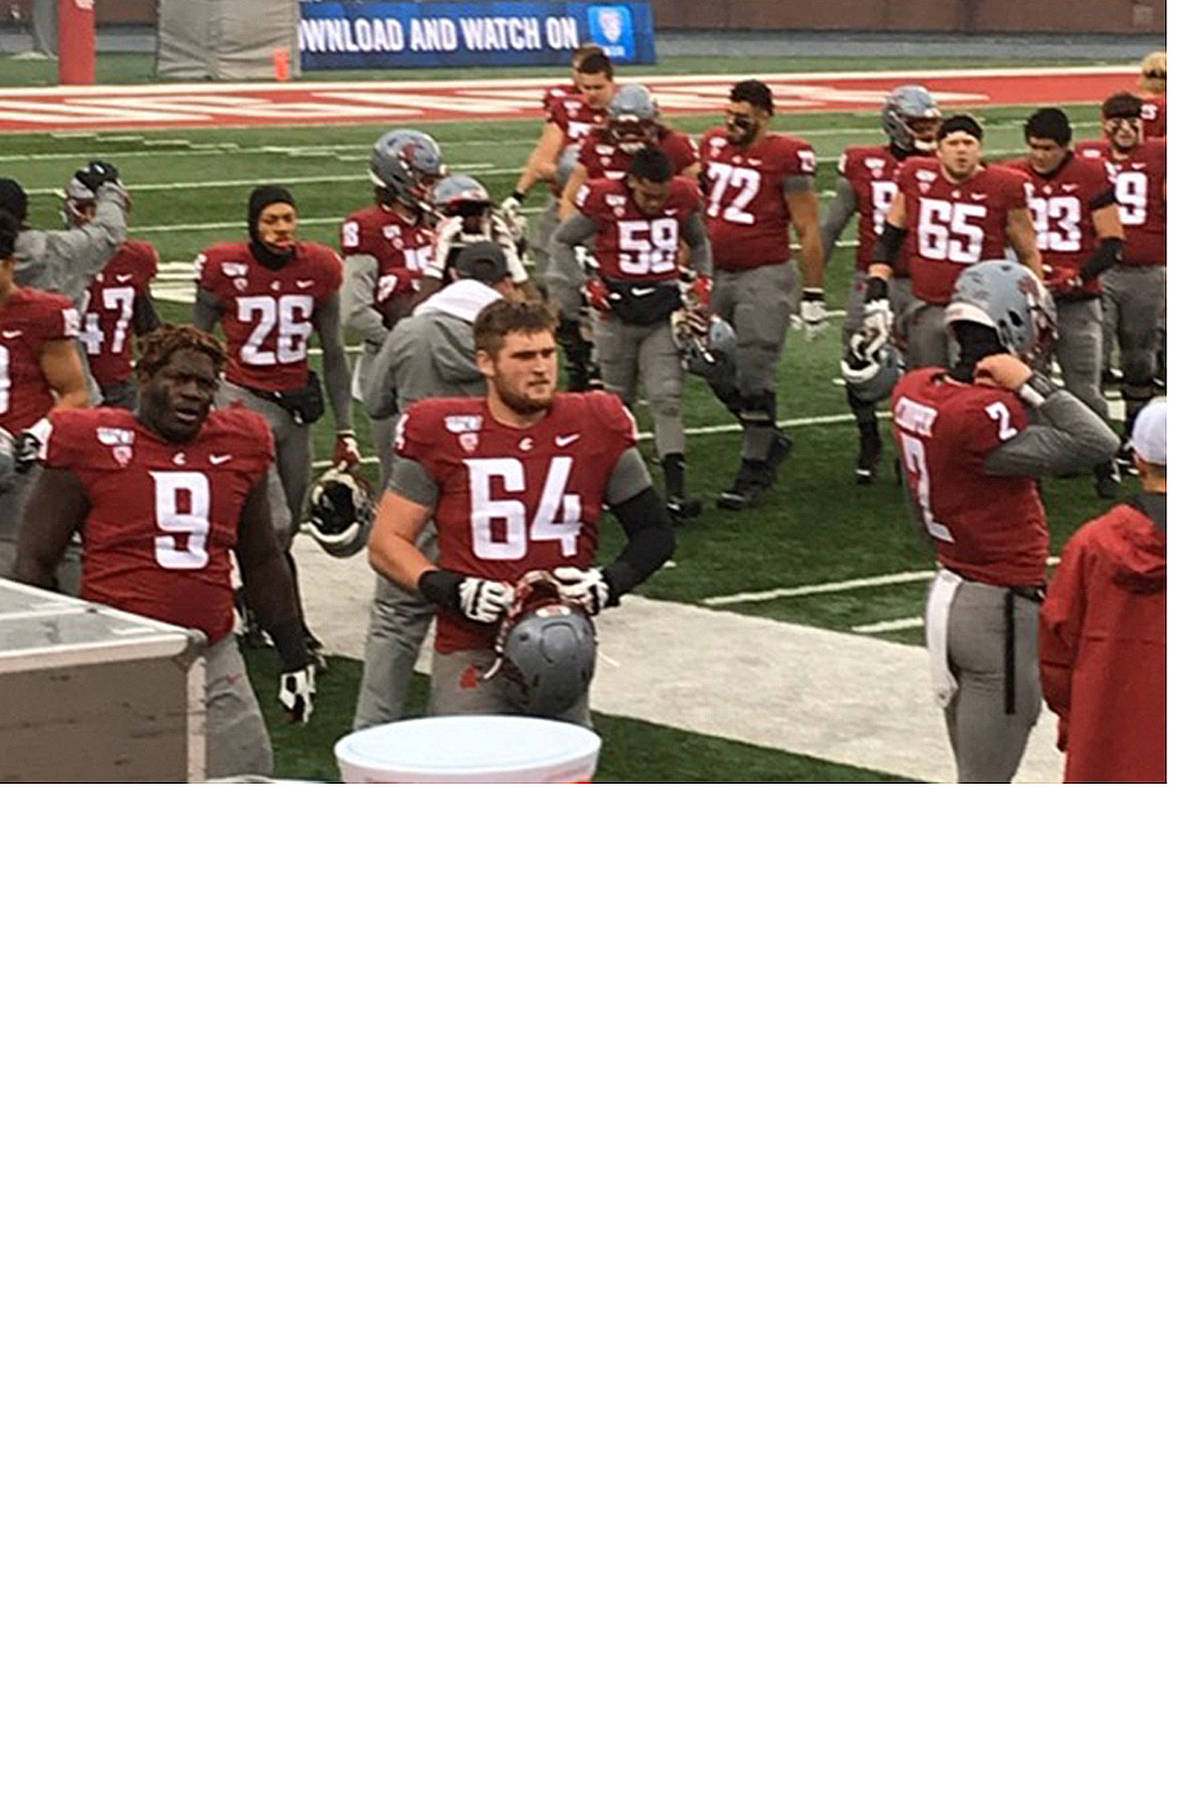 WSU walk-on from Arlington sees his first action